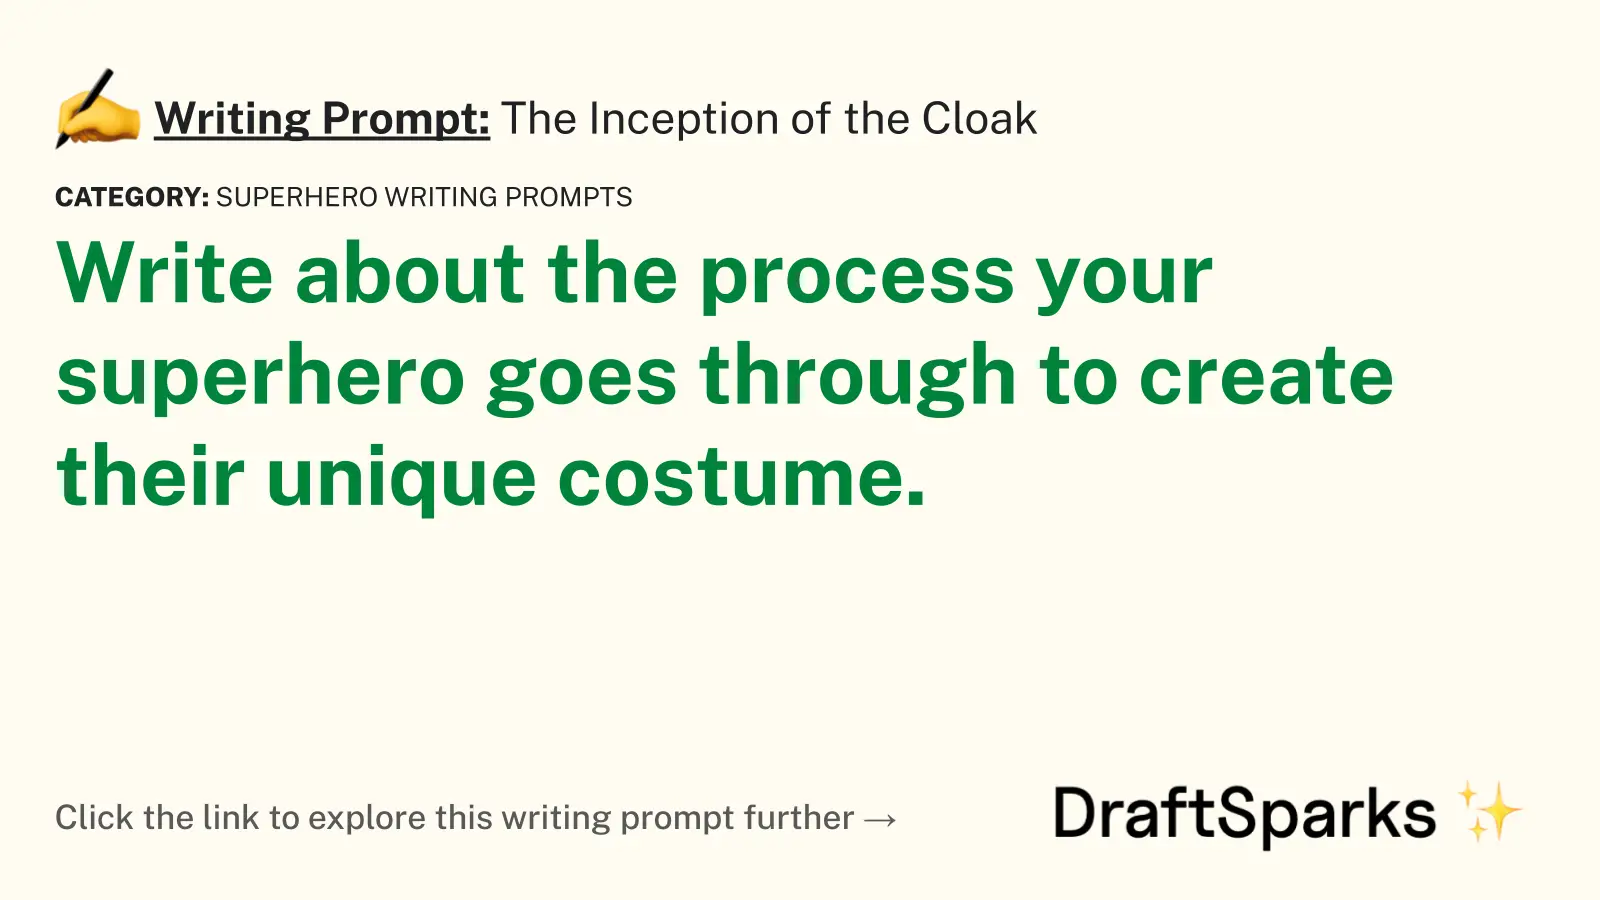 The Inception of the Cloak